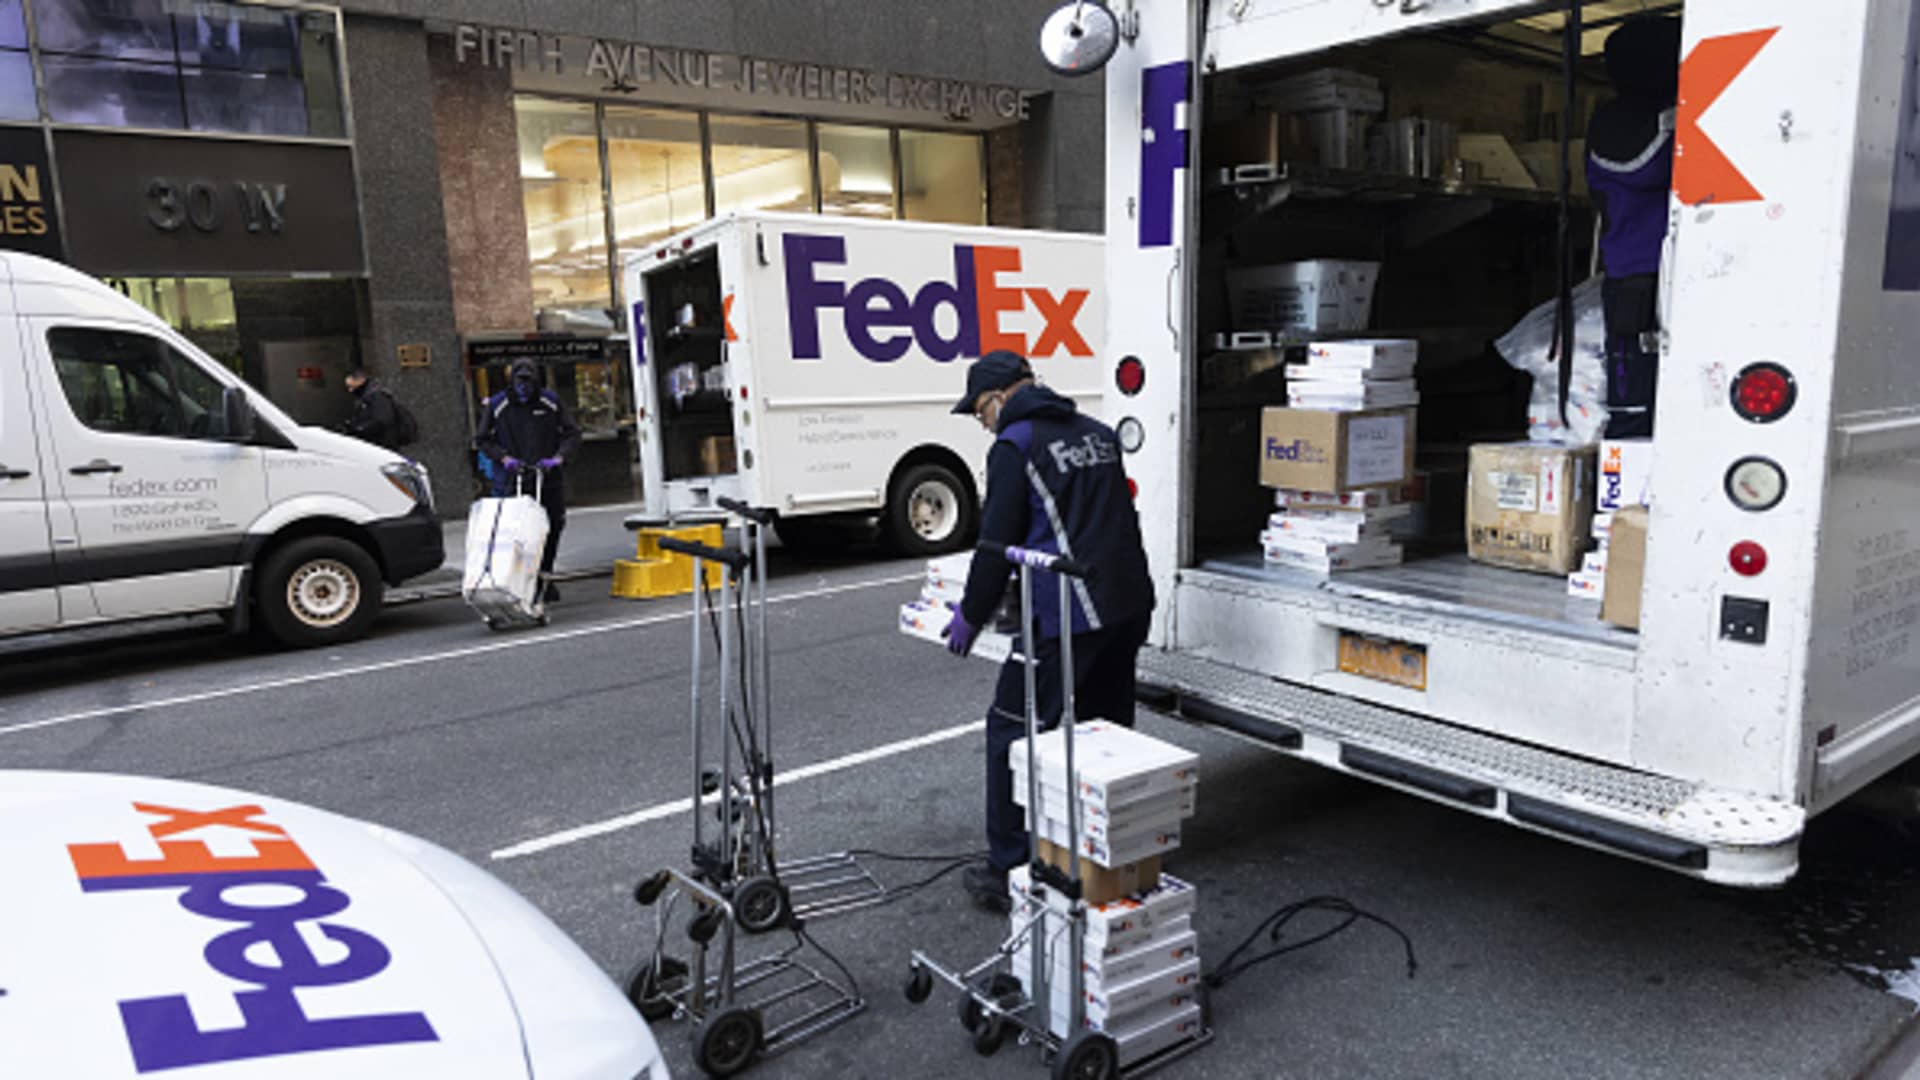 A FedEx Corp. courier prepares packages for delivery during Cyber Monday in the Diamond District neighborhood of New York, U.S., on Monday, Nov. 29, 2021.